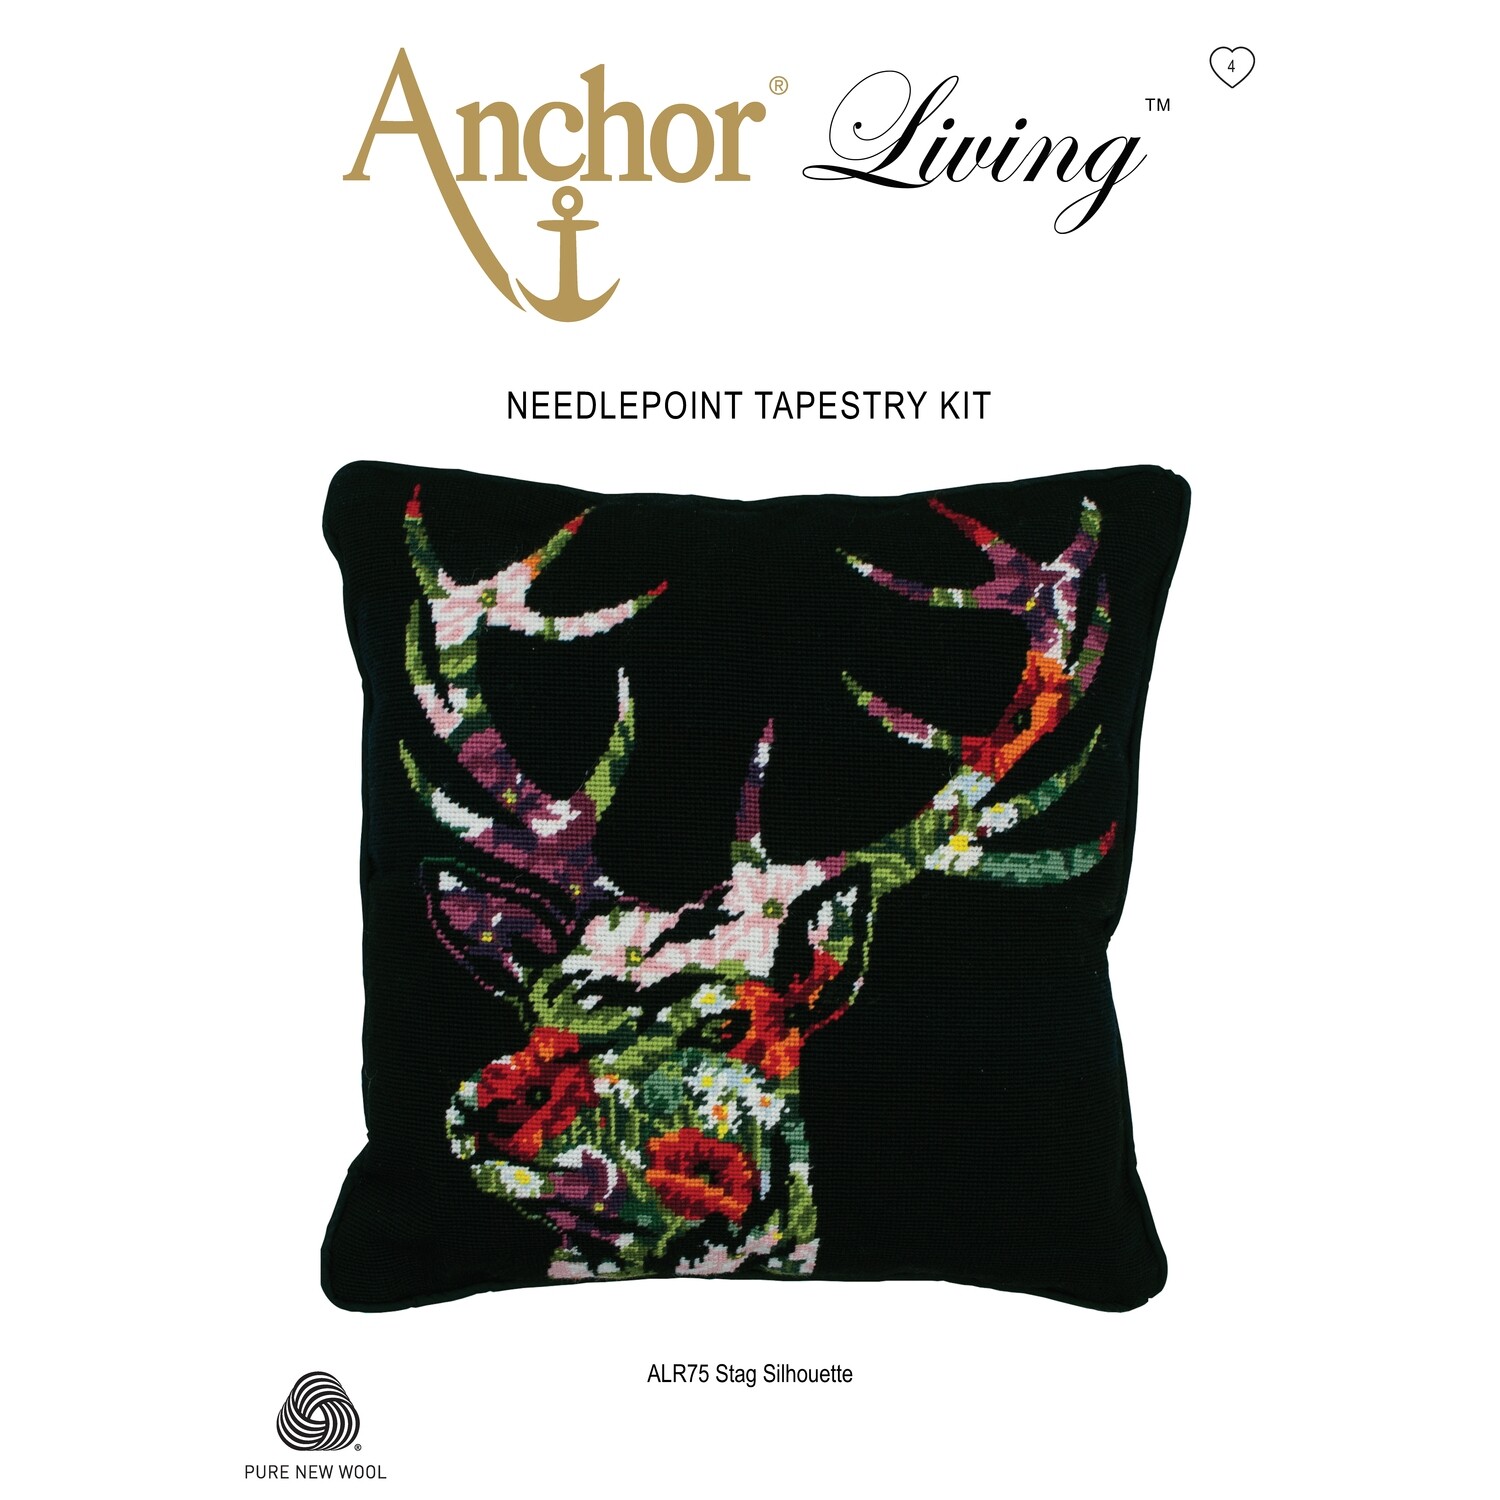 Anchor Essentials Tapestry Kit - Tapestry Stag Silhouette